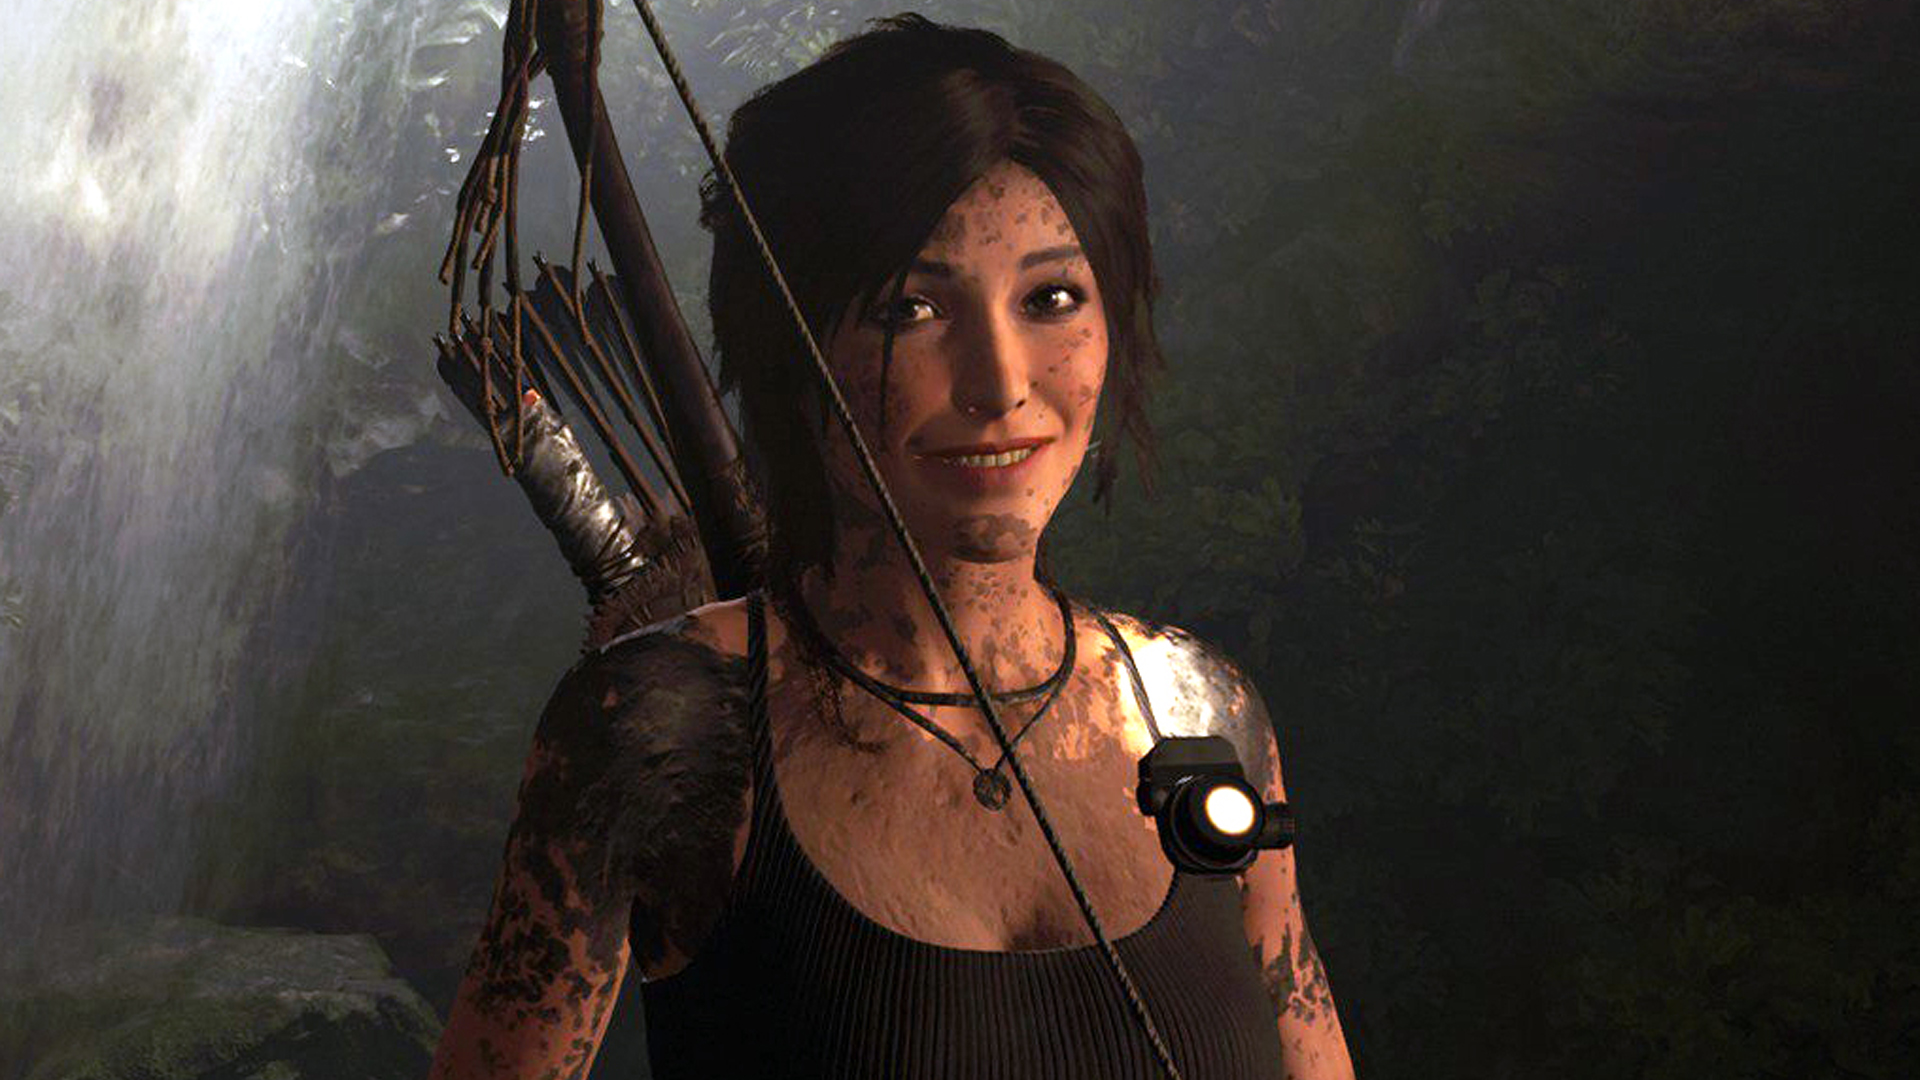 Shadow of the Tomb Raider is Free on the Epic